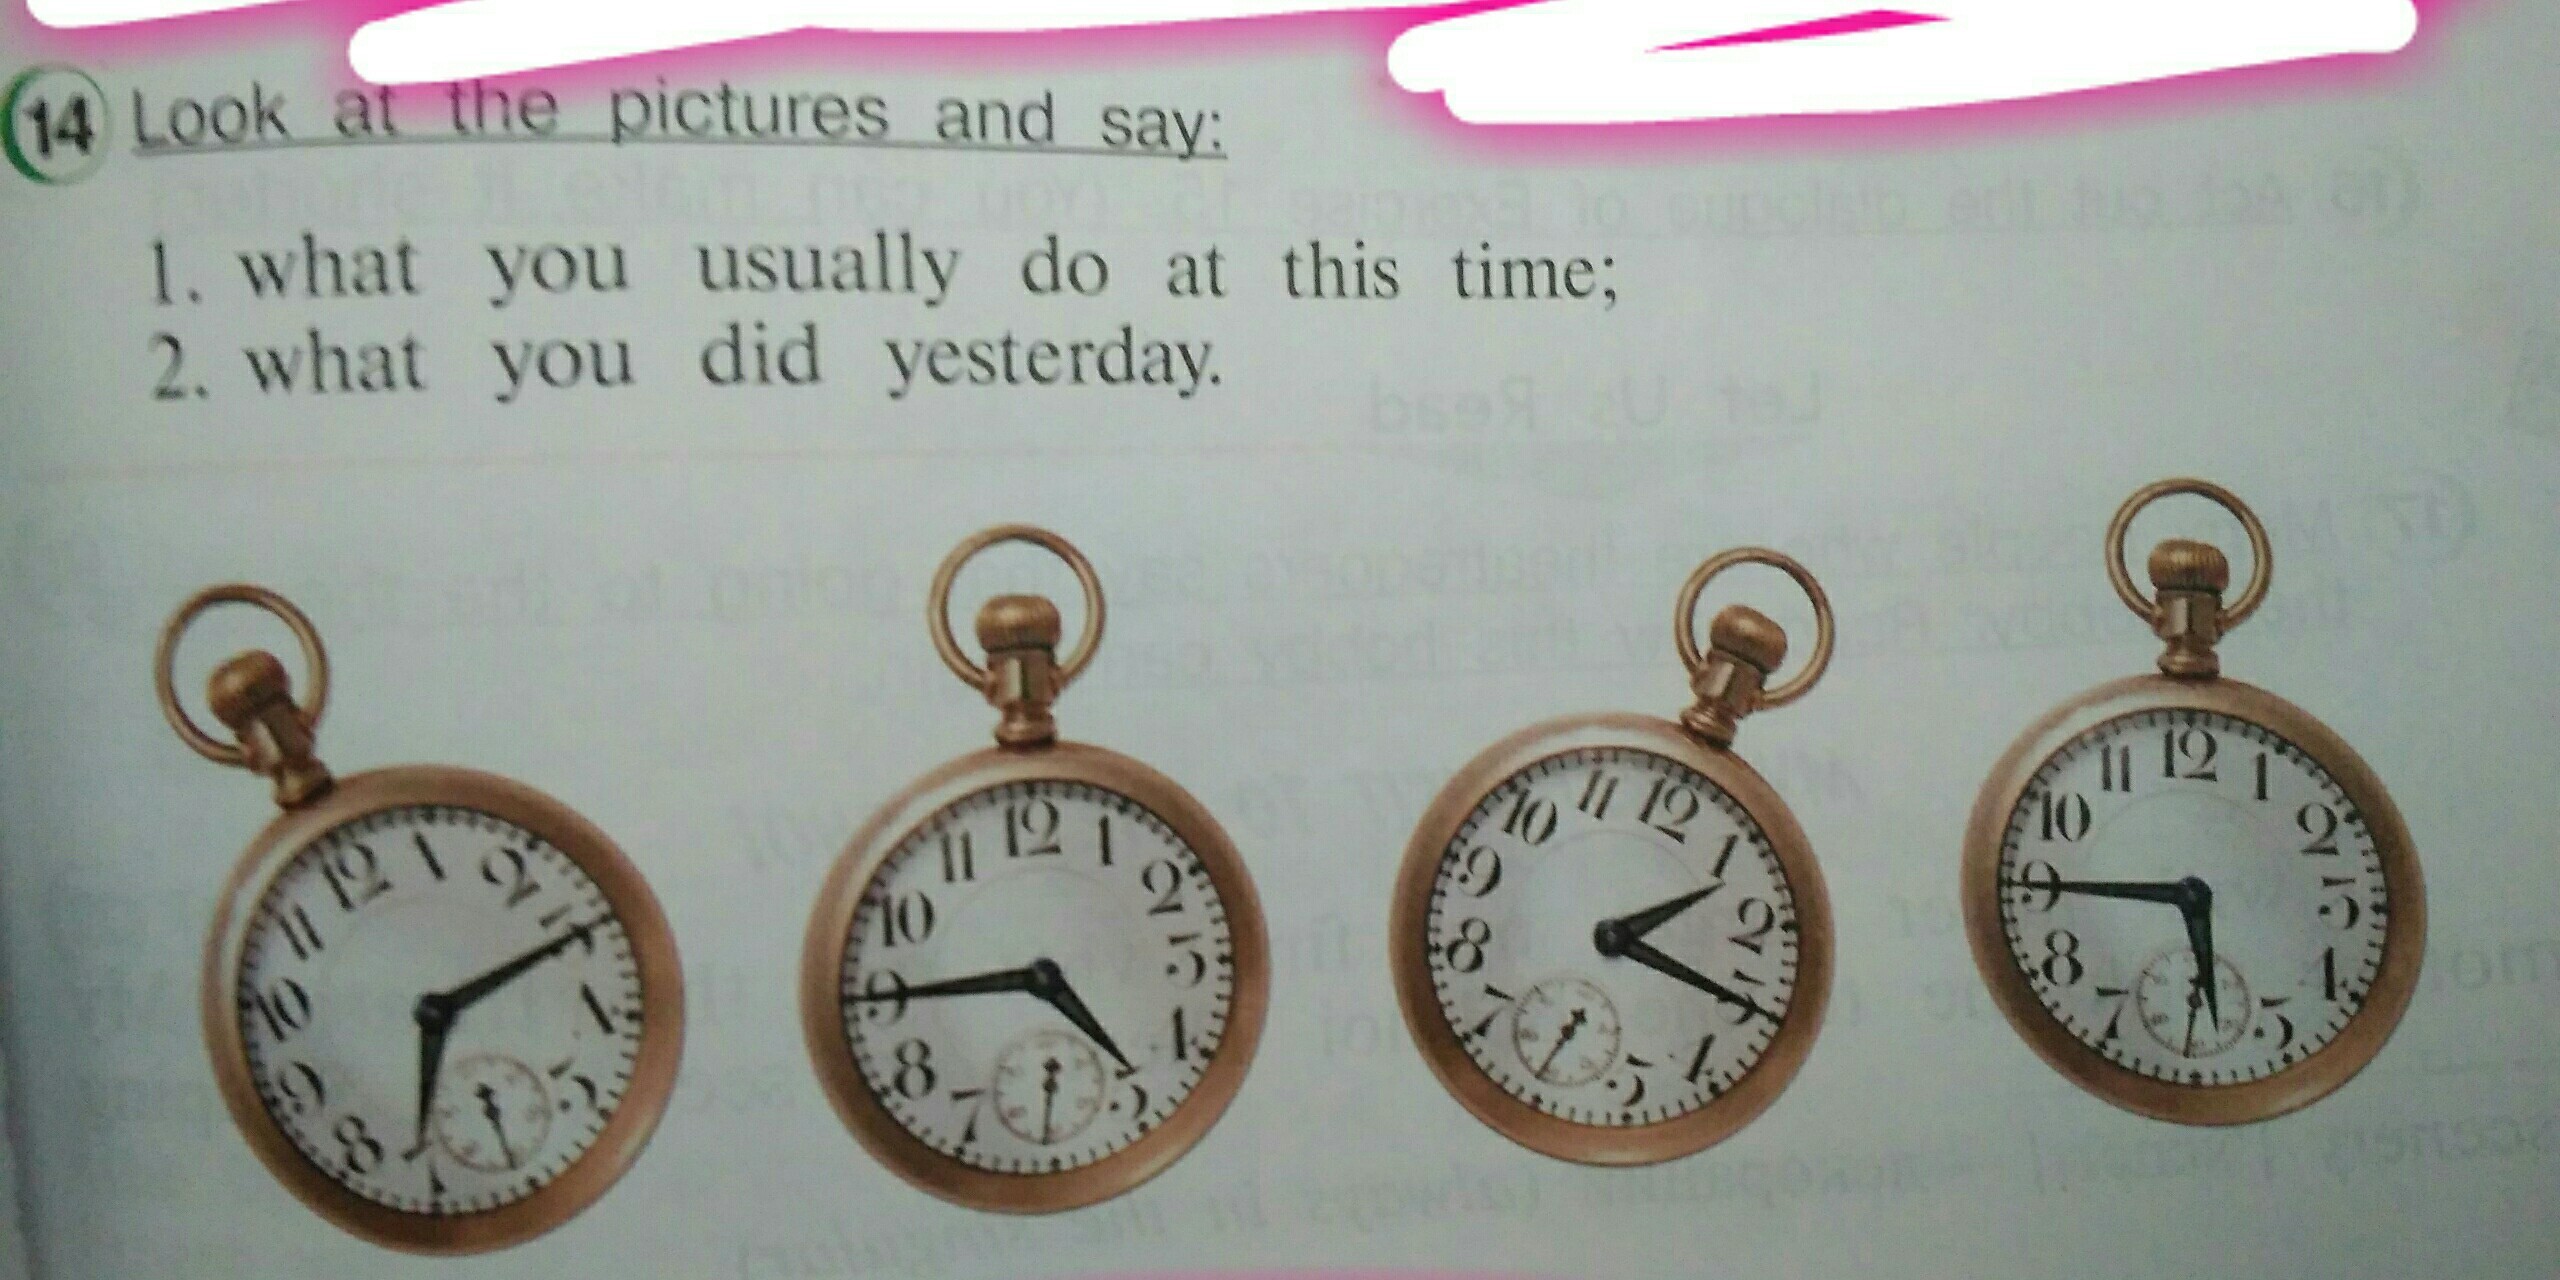 Look at this these pictures. What time do you usually. What do you do at this time. Say what you usually do at this time. What they usually do at this time.